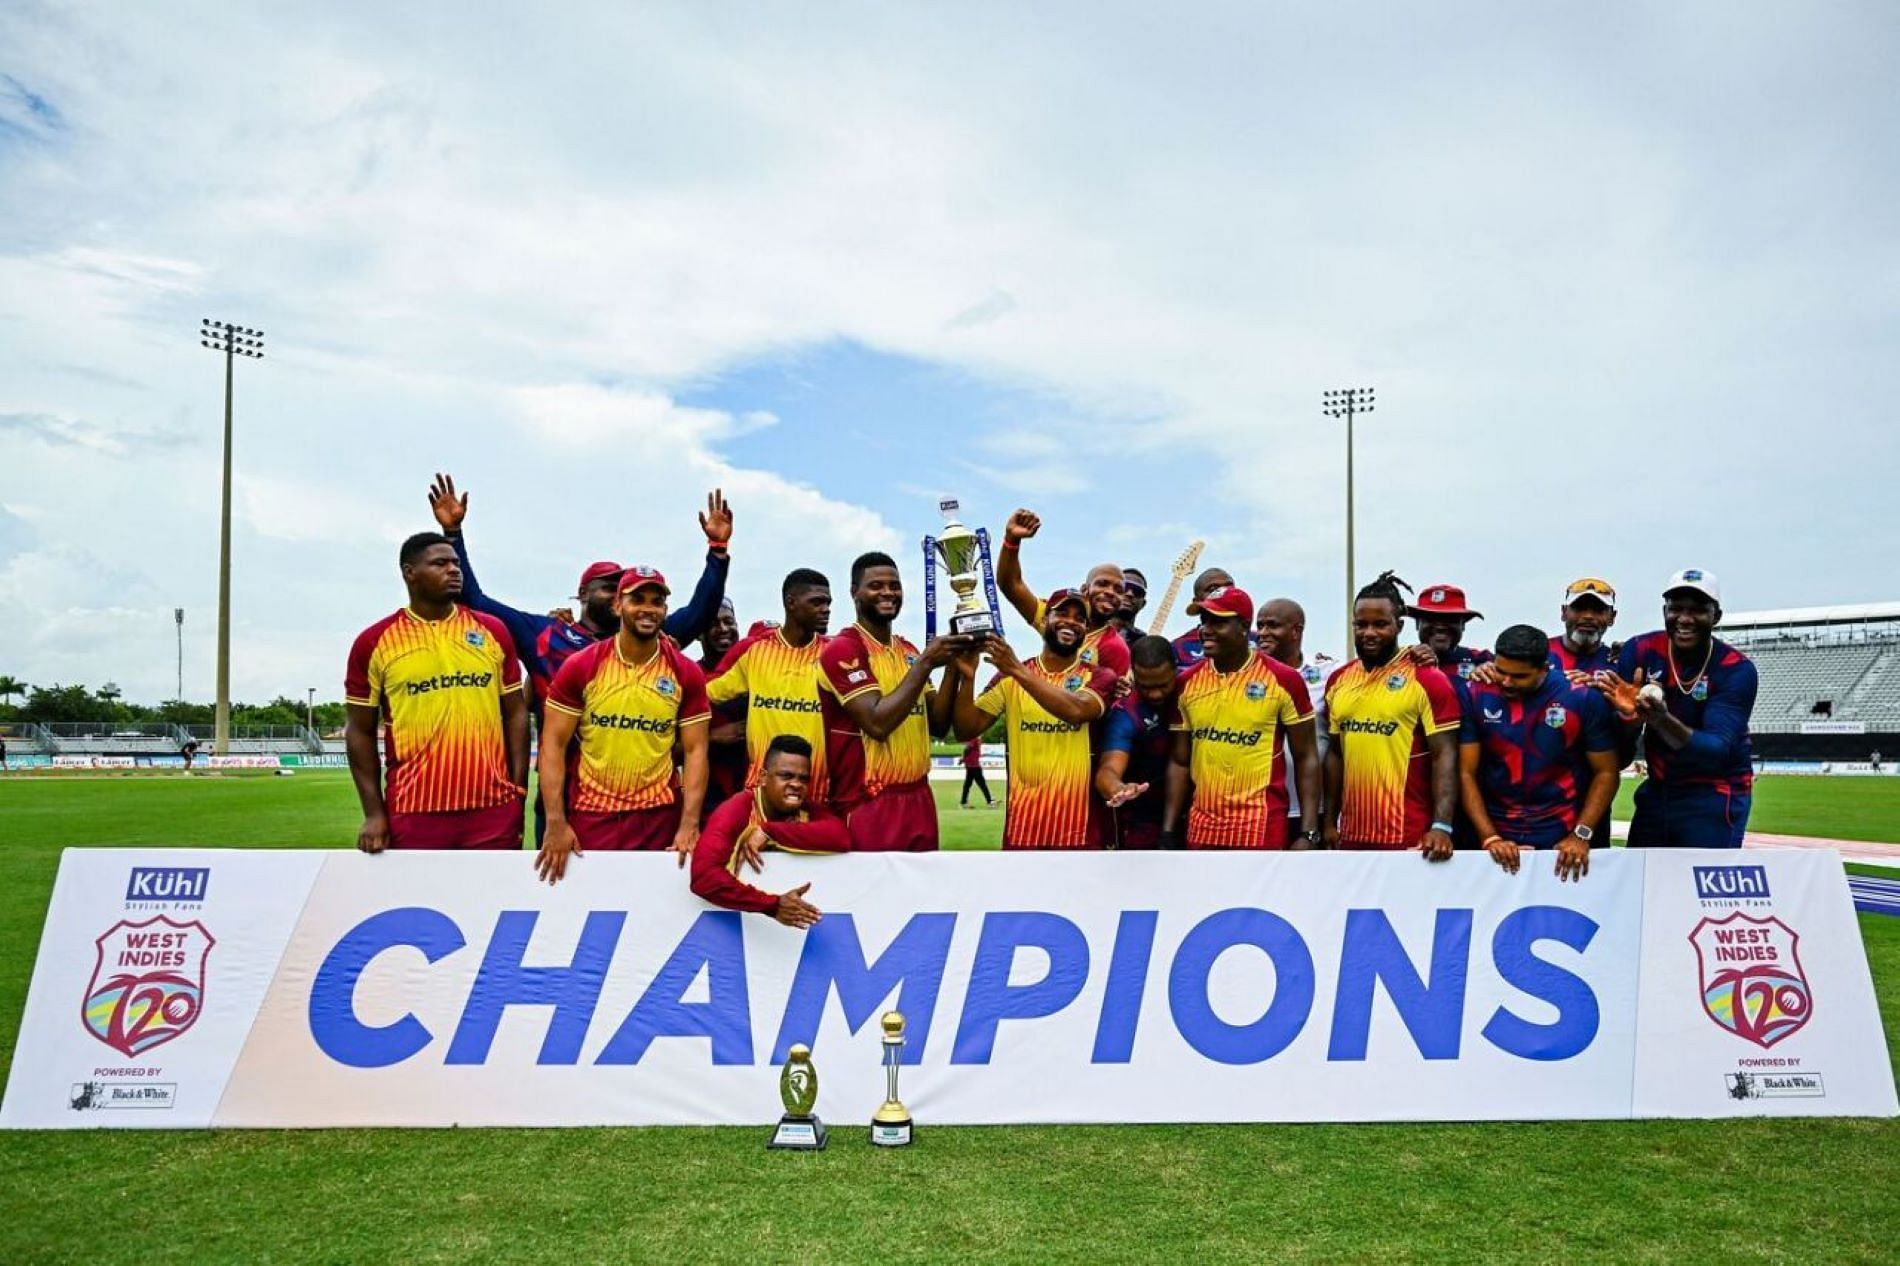 West Indies beat India in the deciding T20I to win the series 3-2.